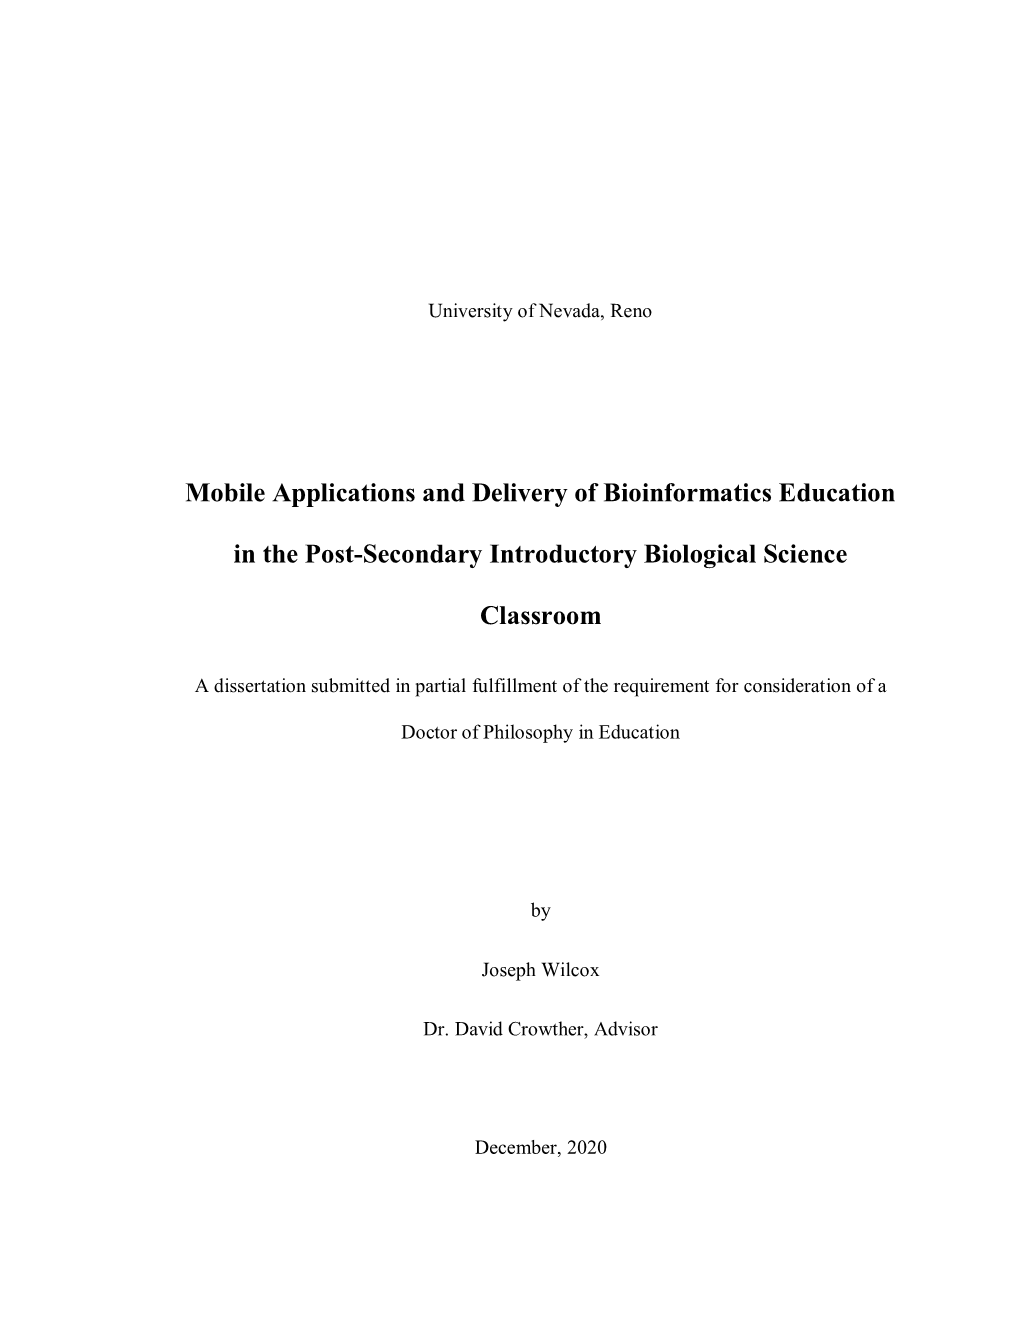 Mobile Applications and Delivery of Bioinformatics Education in the Post